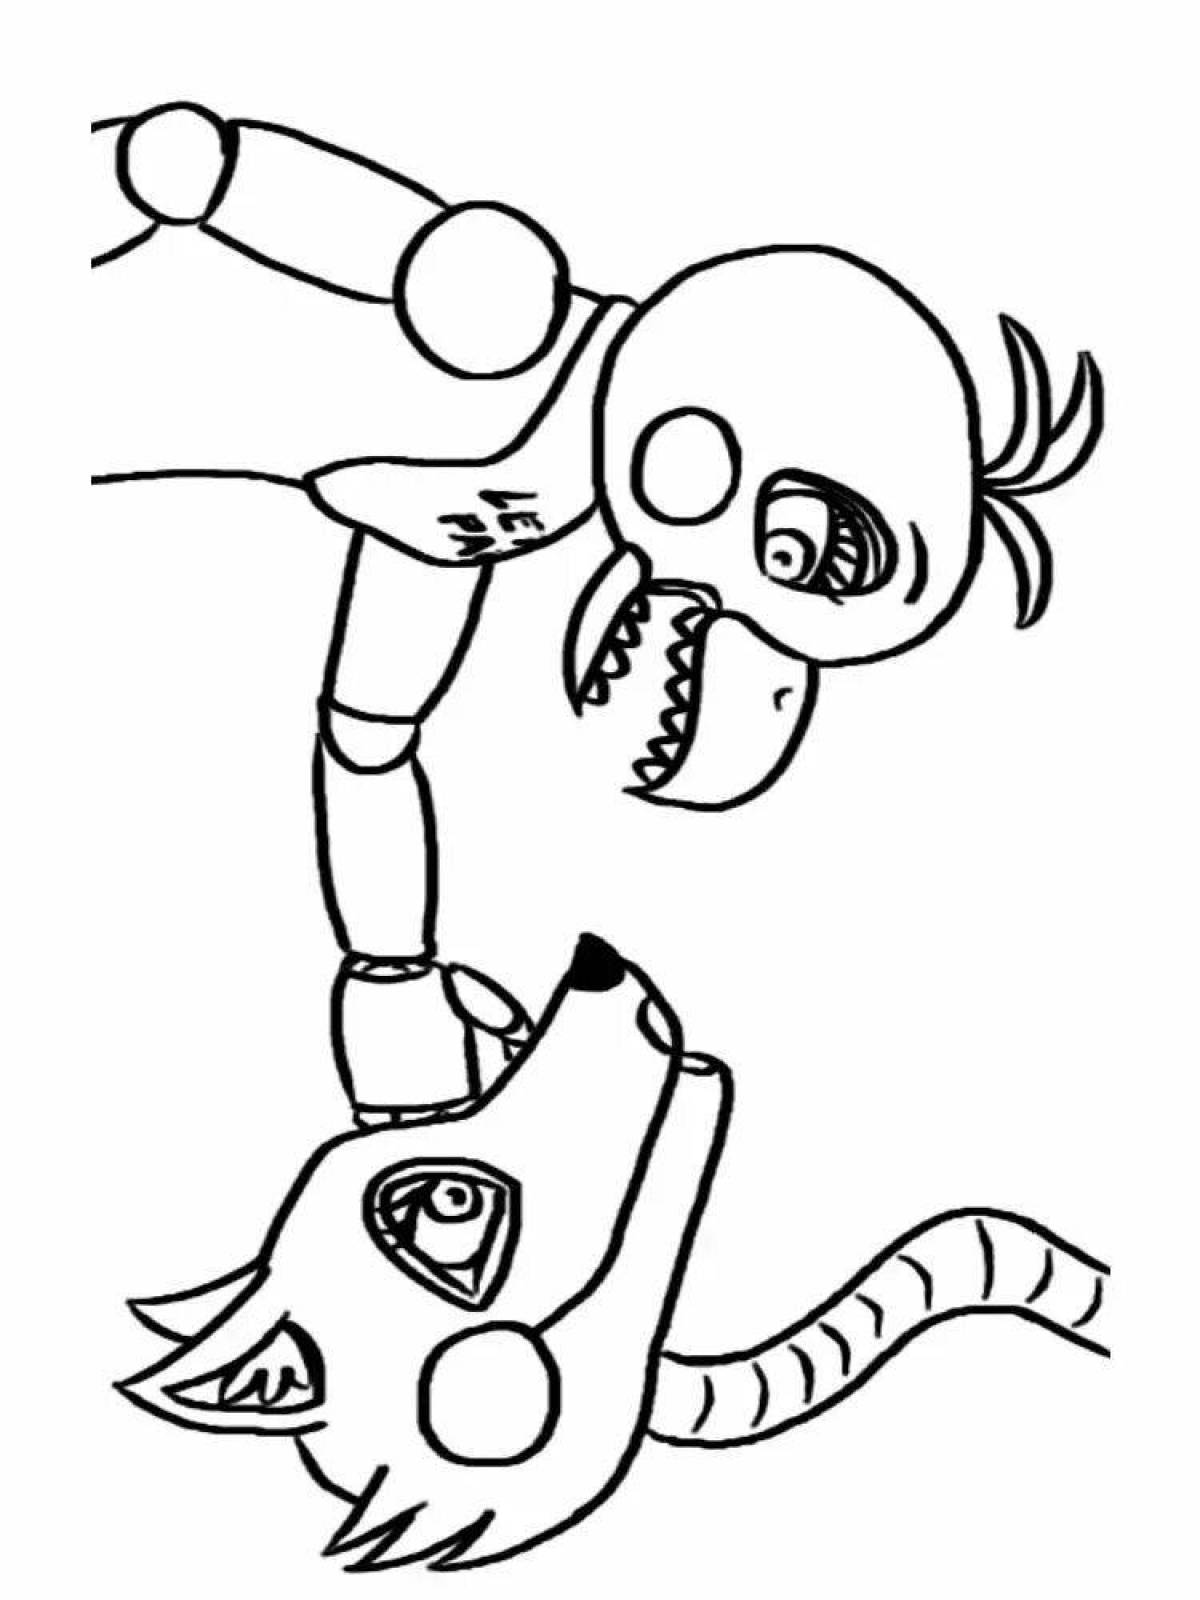 Sweet chica fnaf 9 coloring book